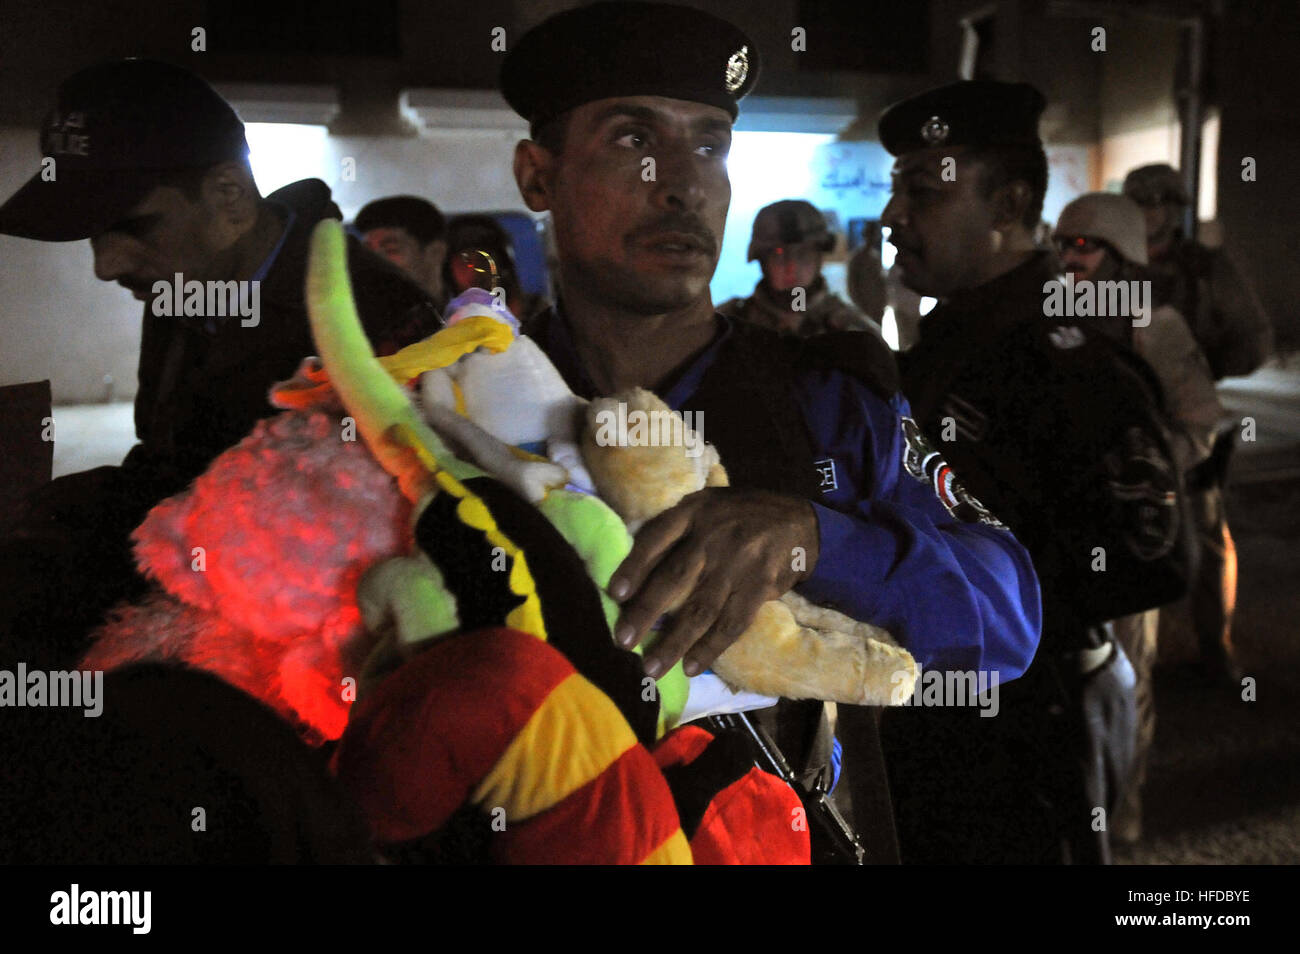 Iraqi police remove stuffed animals and candy from their vehicles during a walking patrol along the 60th Street Market area meeting Iraqi civilians, handing out toys to the children and speaking with local business owners, Nov. 15, in the Al Doura community located in southern Baghdad, Iraq. U.S. Air Force Joint Patrol 130571 Stock Photo